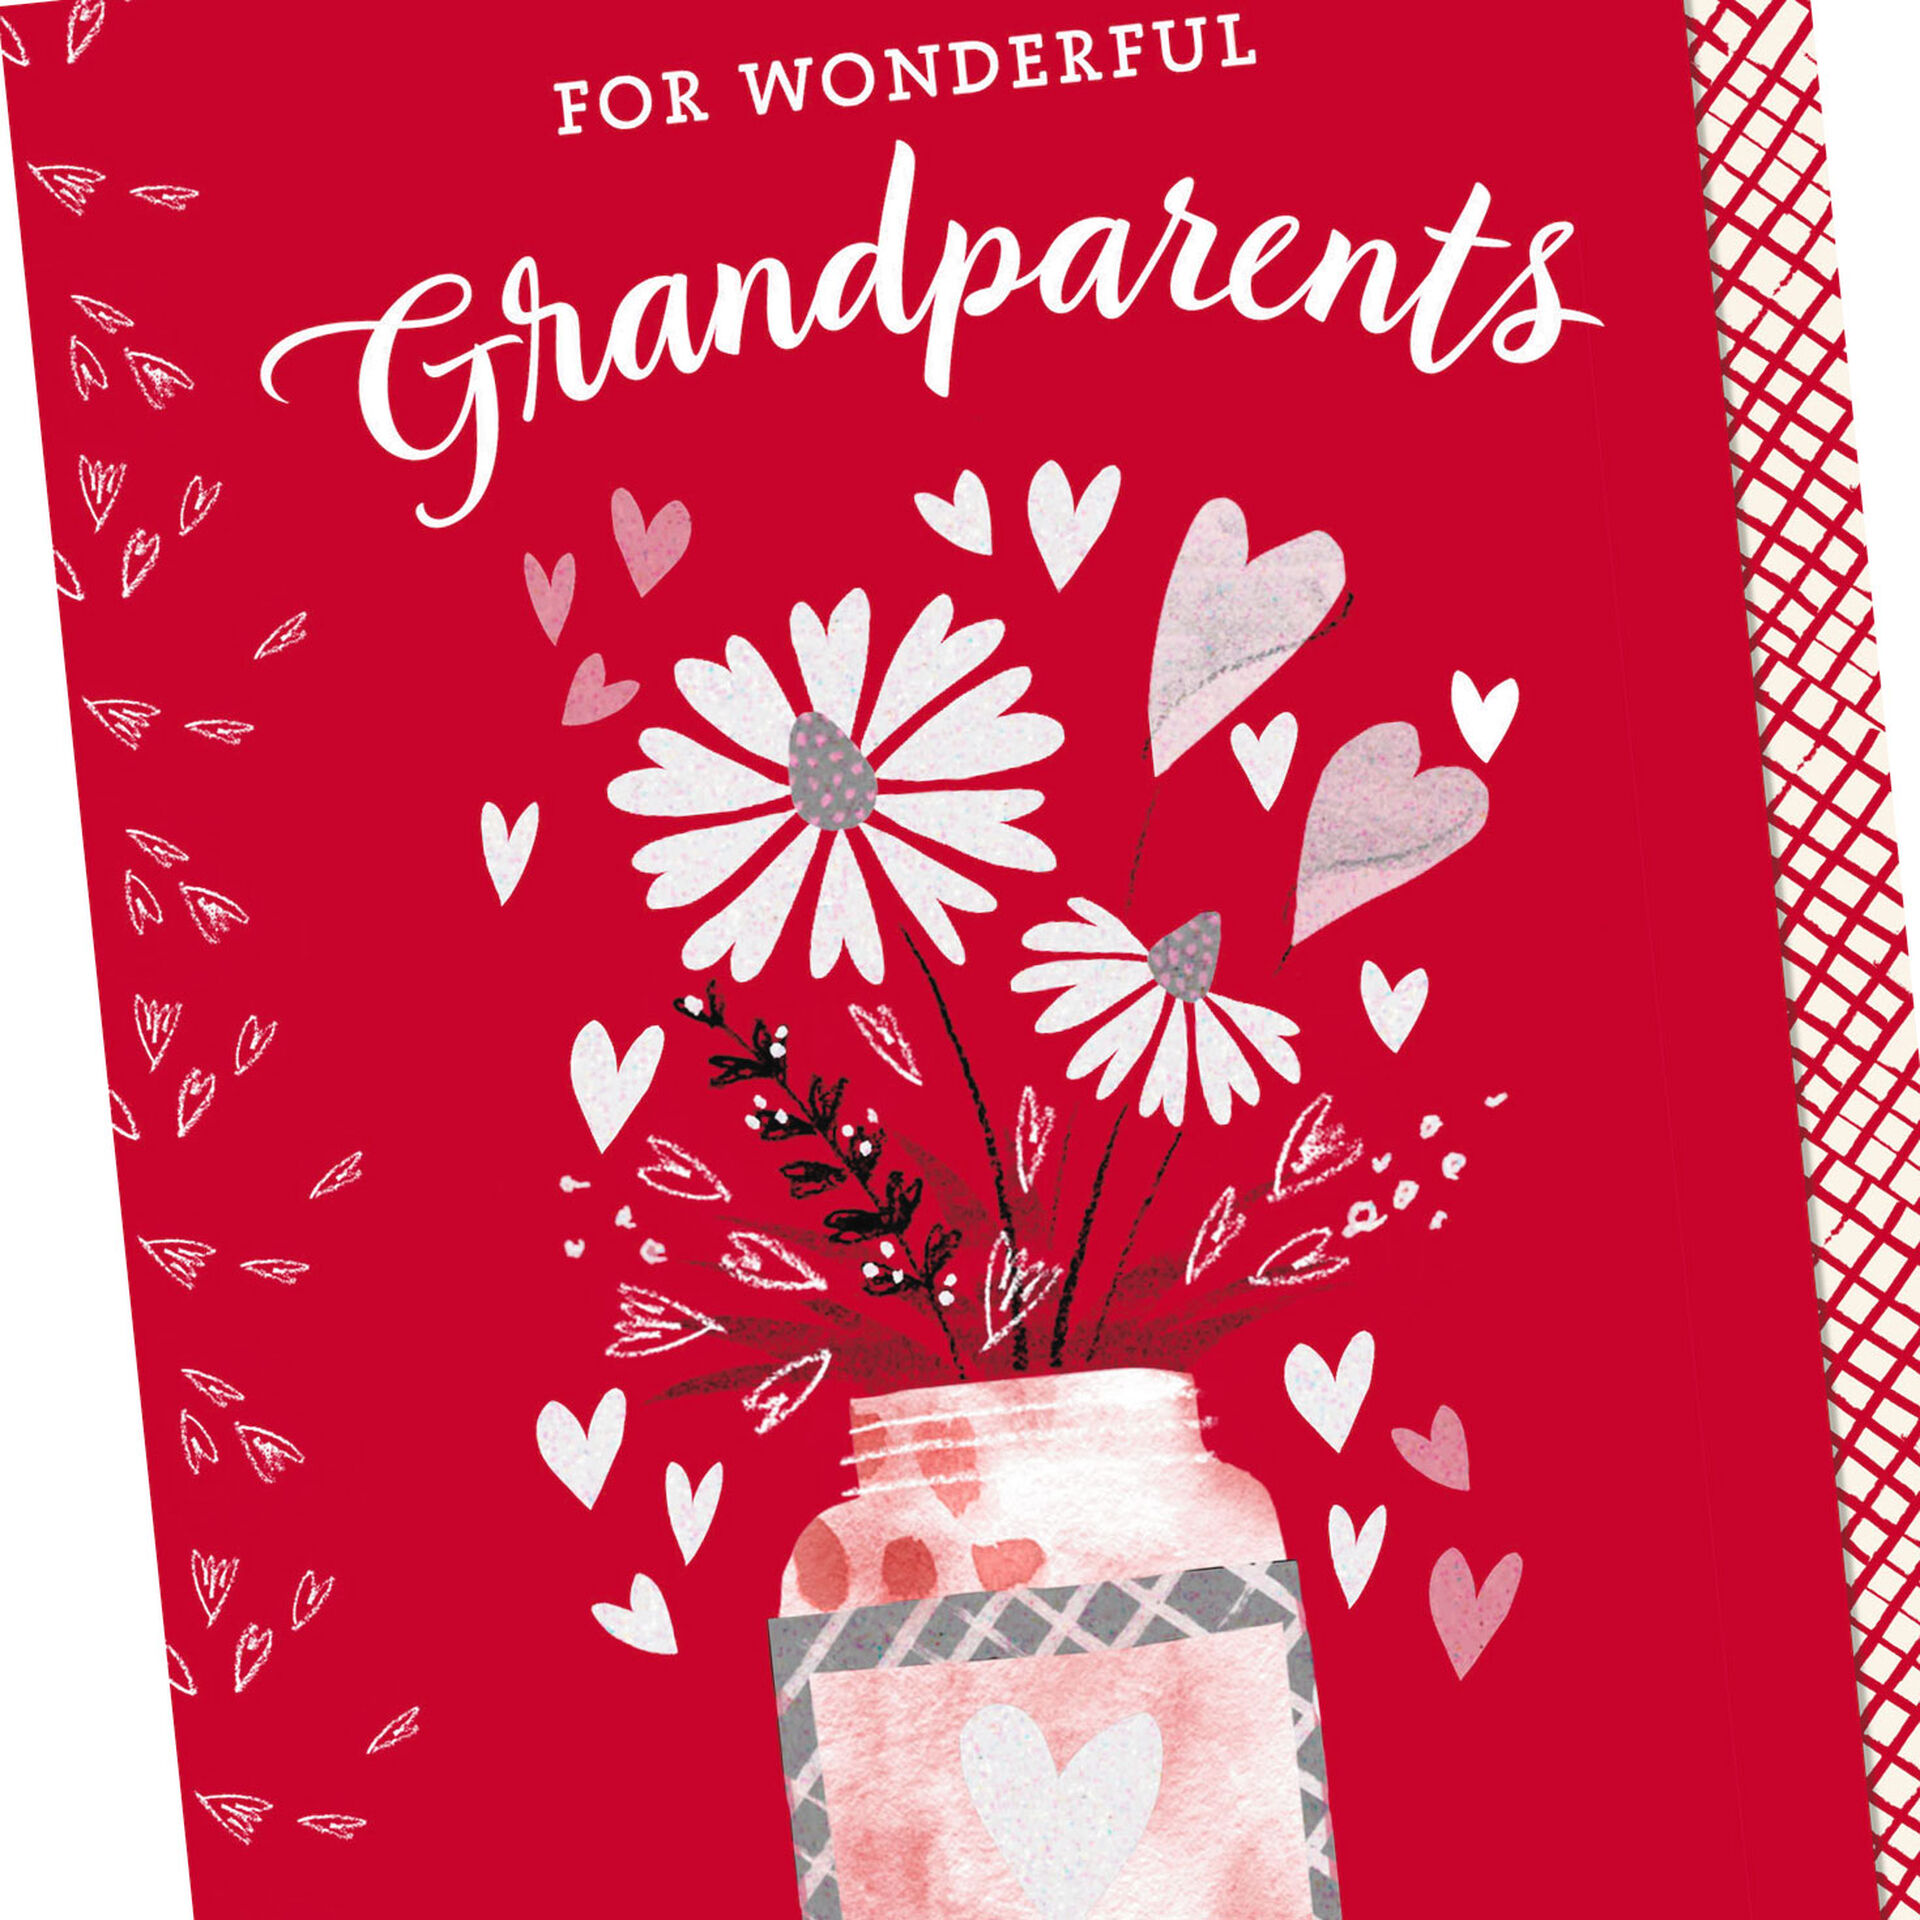 wonderful-people-like-you-valentine-s-day-card-for-grandparents